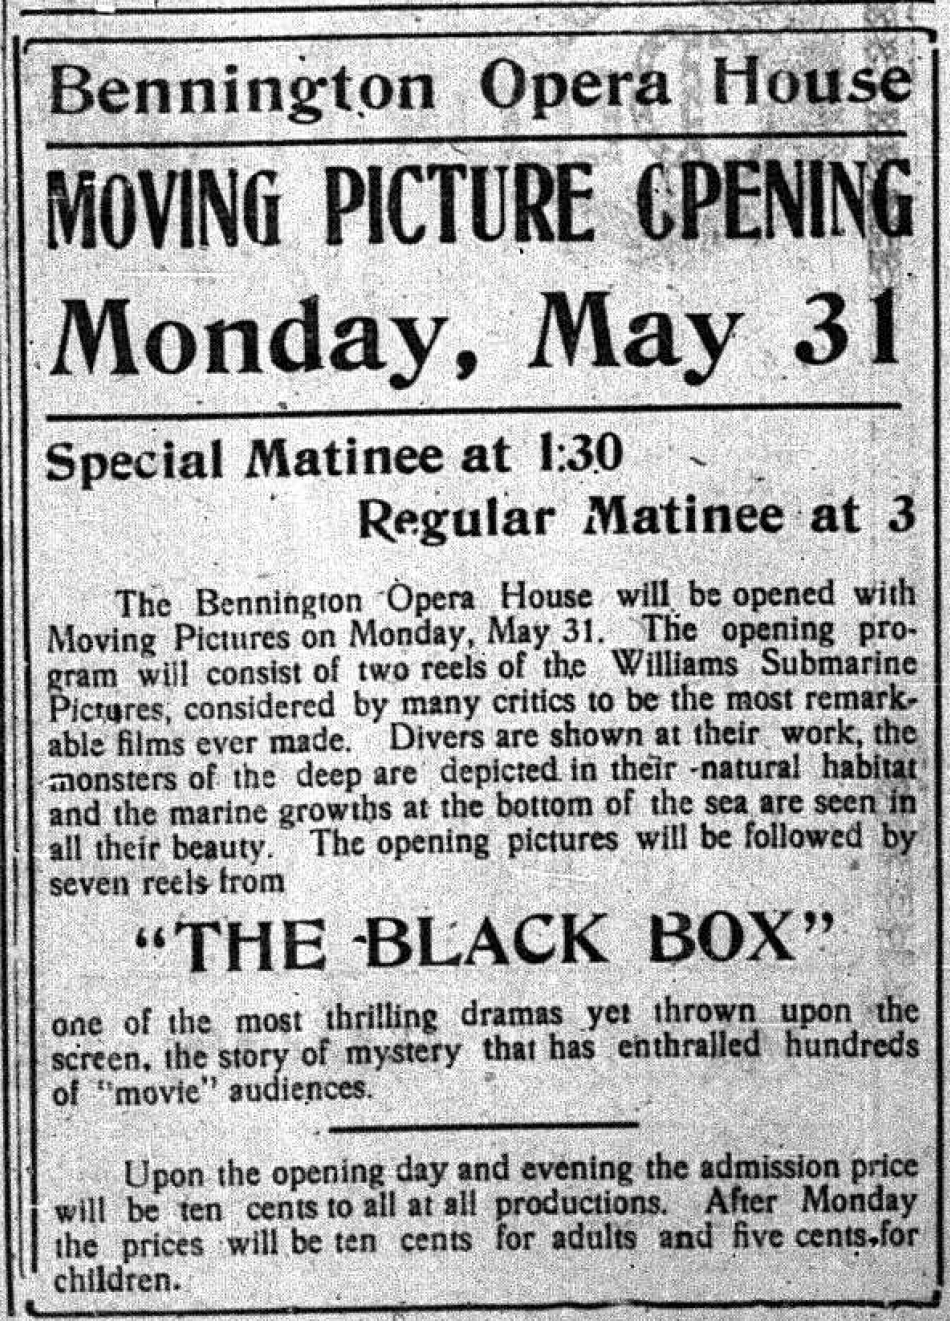 Opening day of films at the opera house. From the Bennington Evening Banner, May 28, 1915.